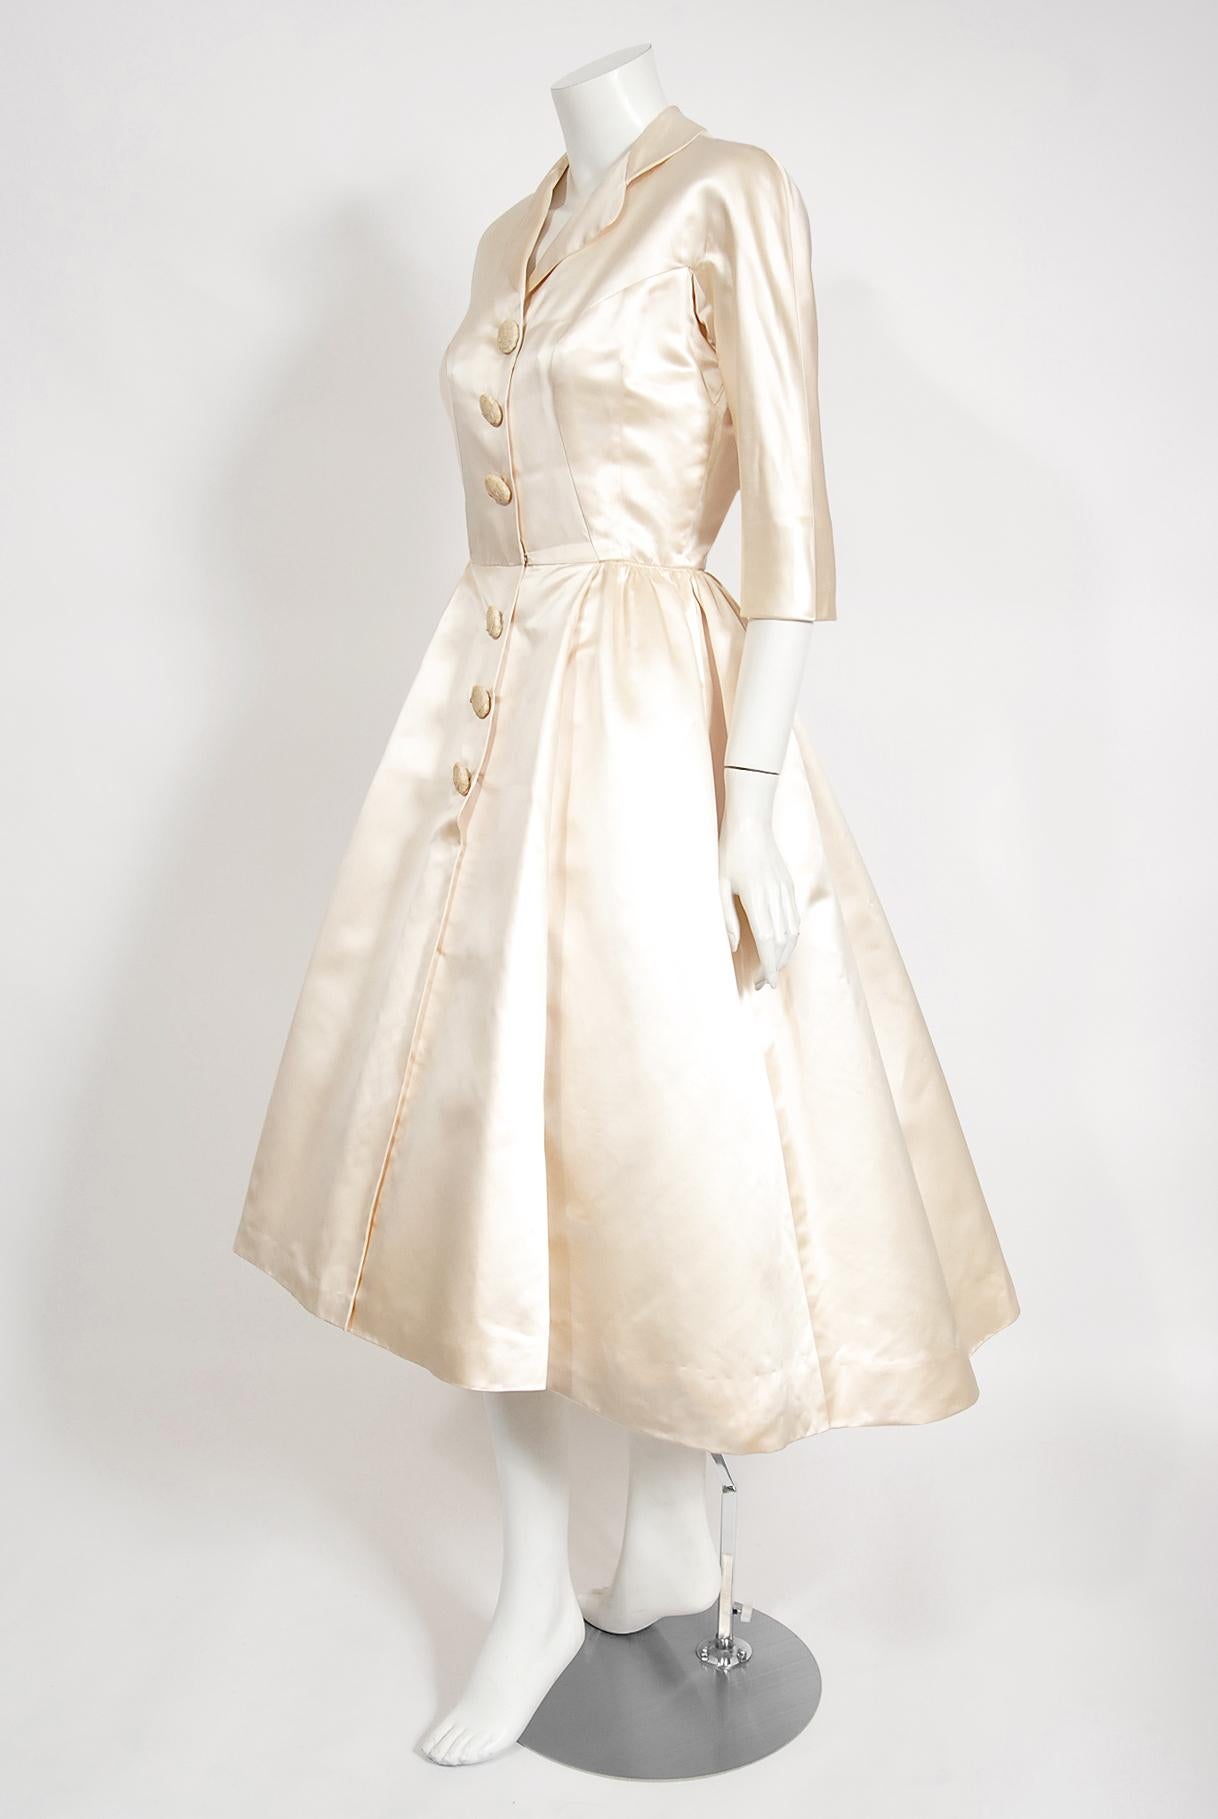 Women's Vintage 1950's Traina-Norell Couture Ivory Silk Satin Full Skirted Bridal Dress